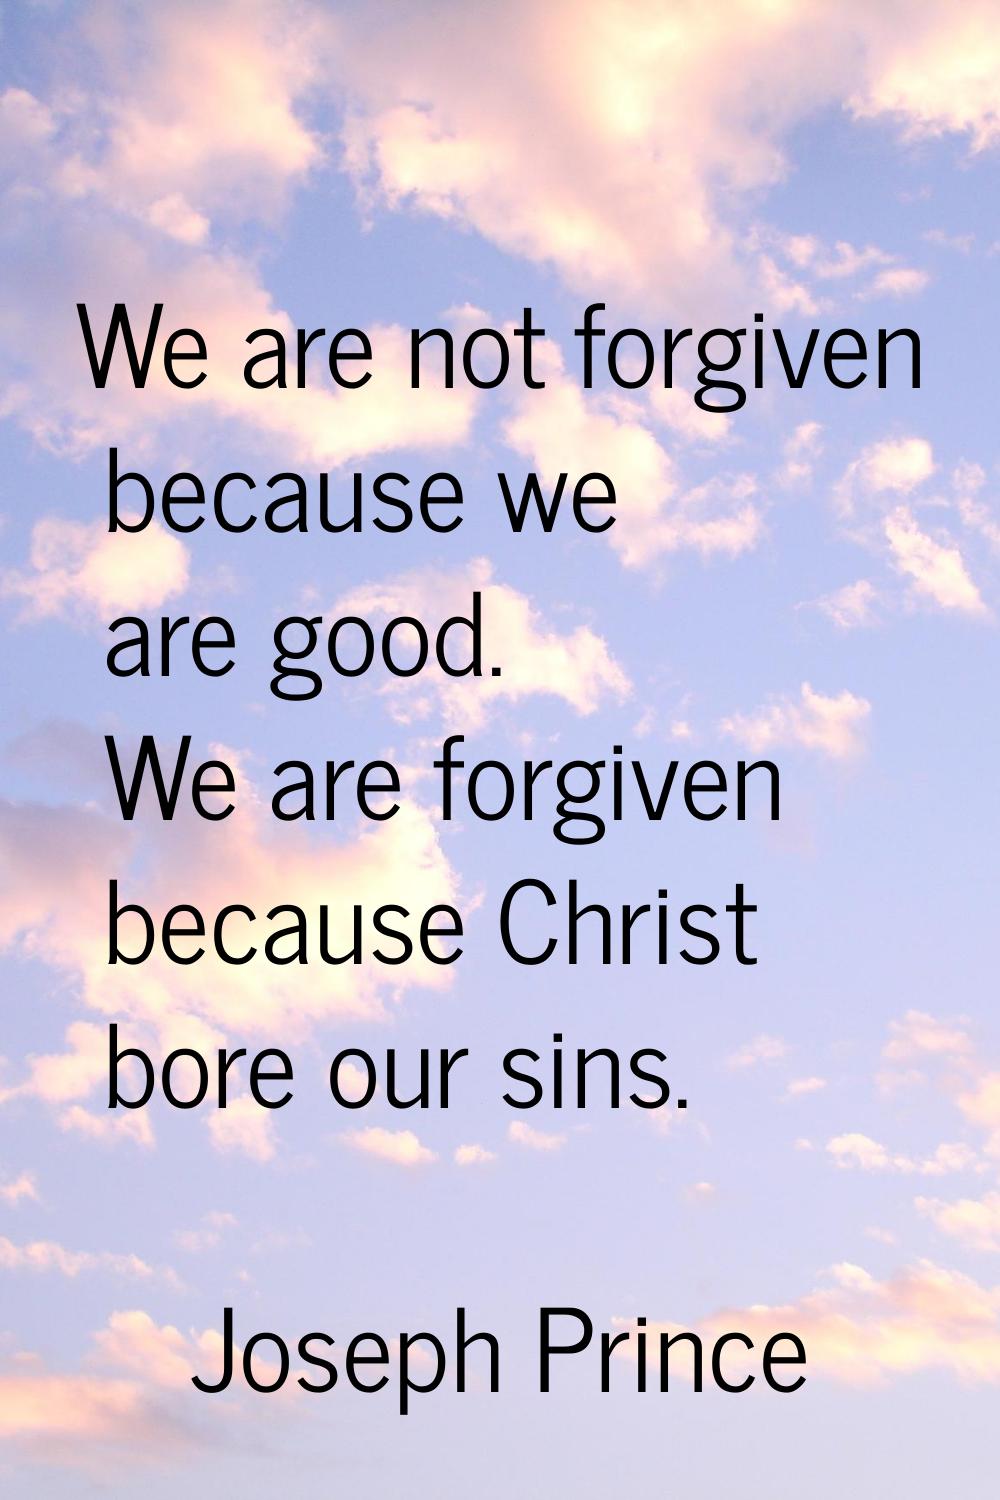 We are not forgiven because we are good. We are forgiven because Christ bore our sins.